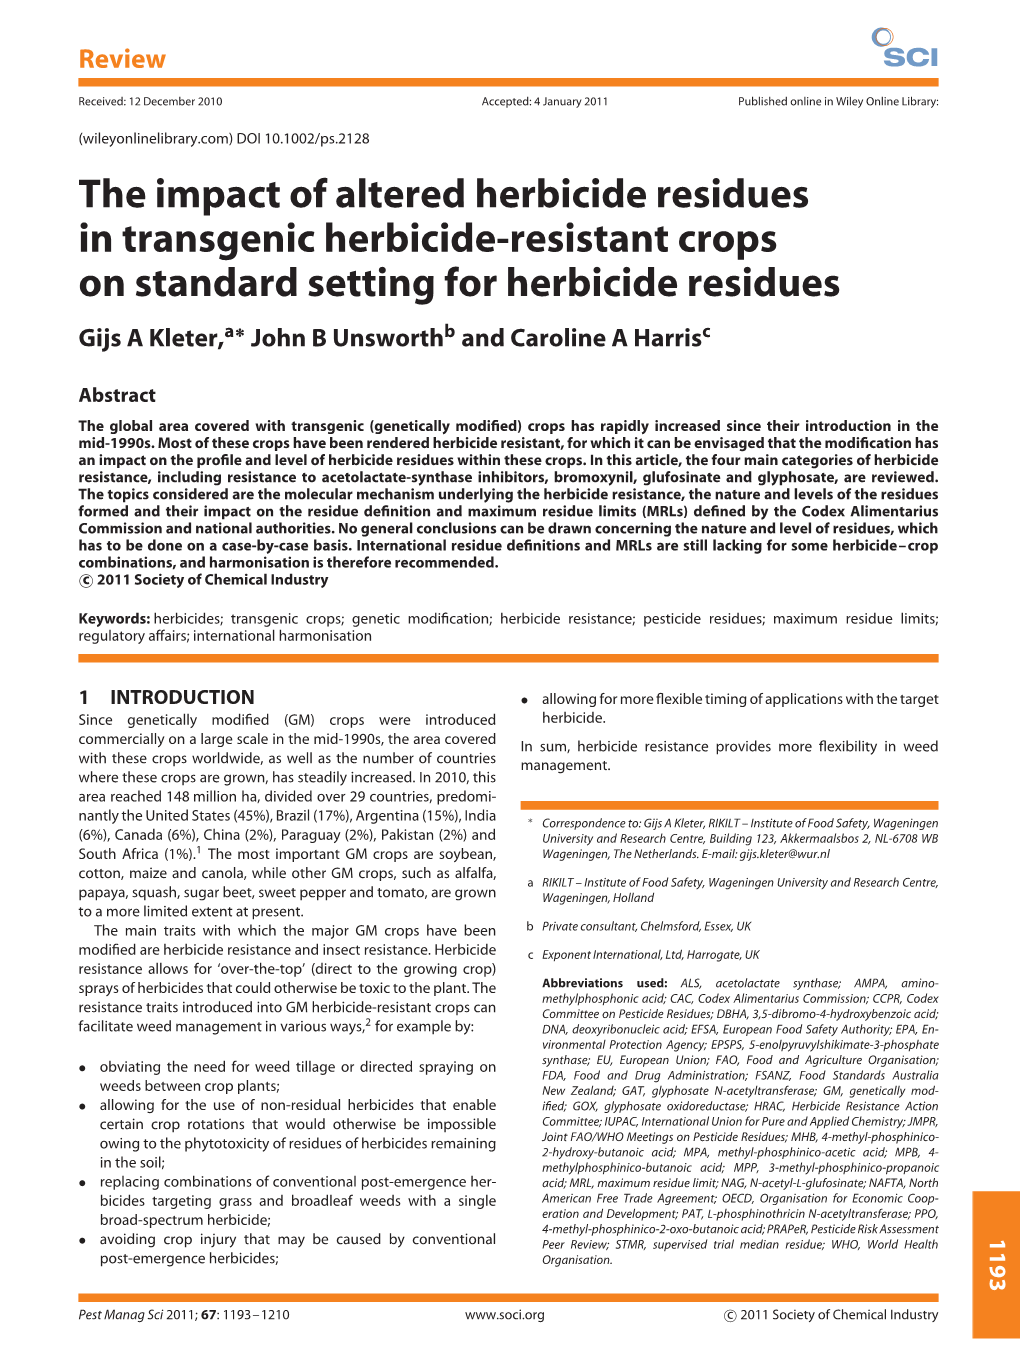 The Impact of Altered Herbicide Residues in Transgenic Herbicideresistant Crops on Standard Setting for Herbicide Residues